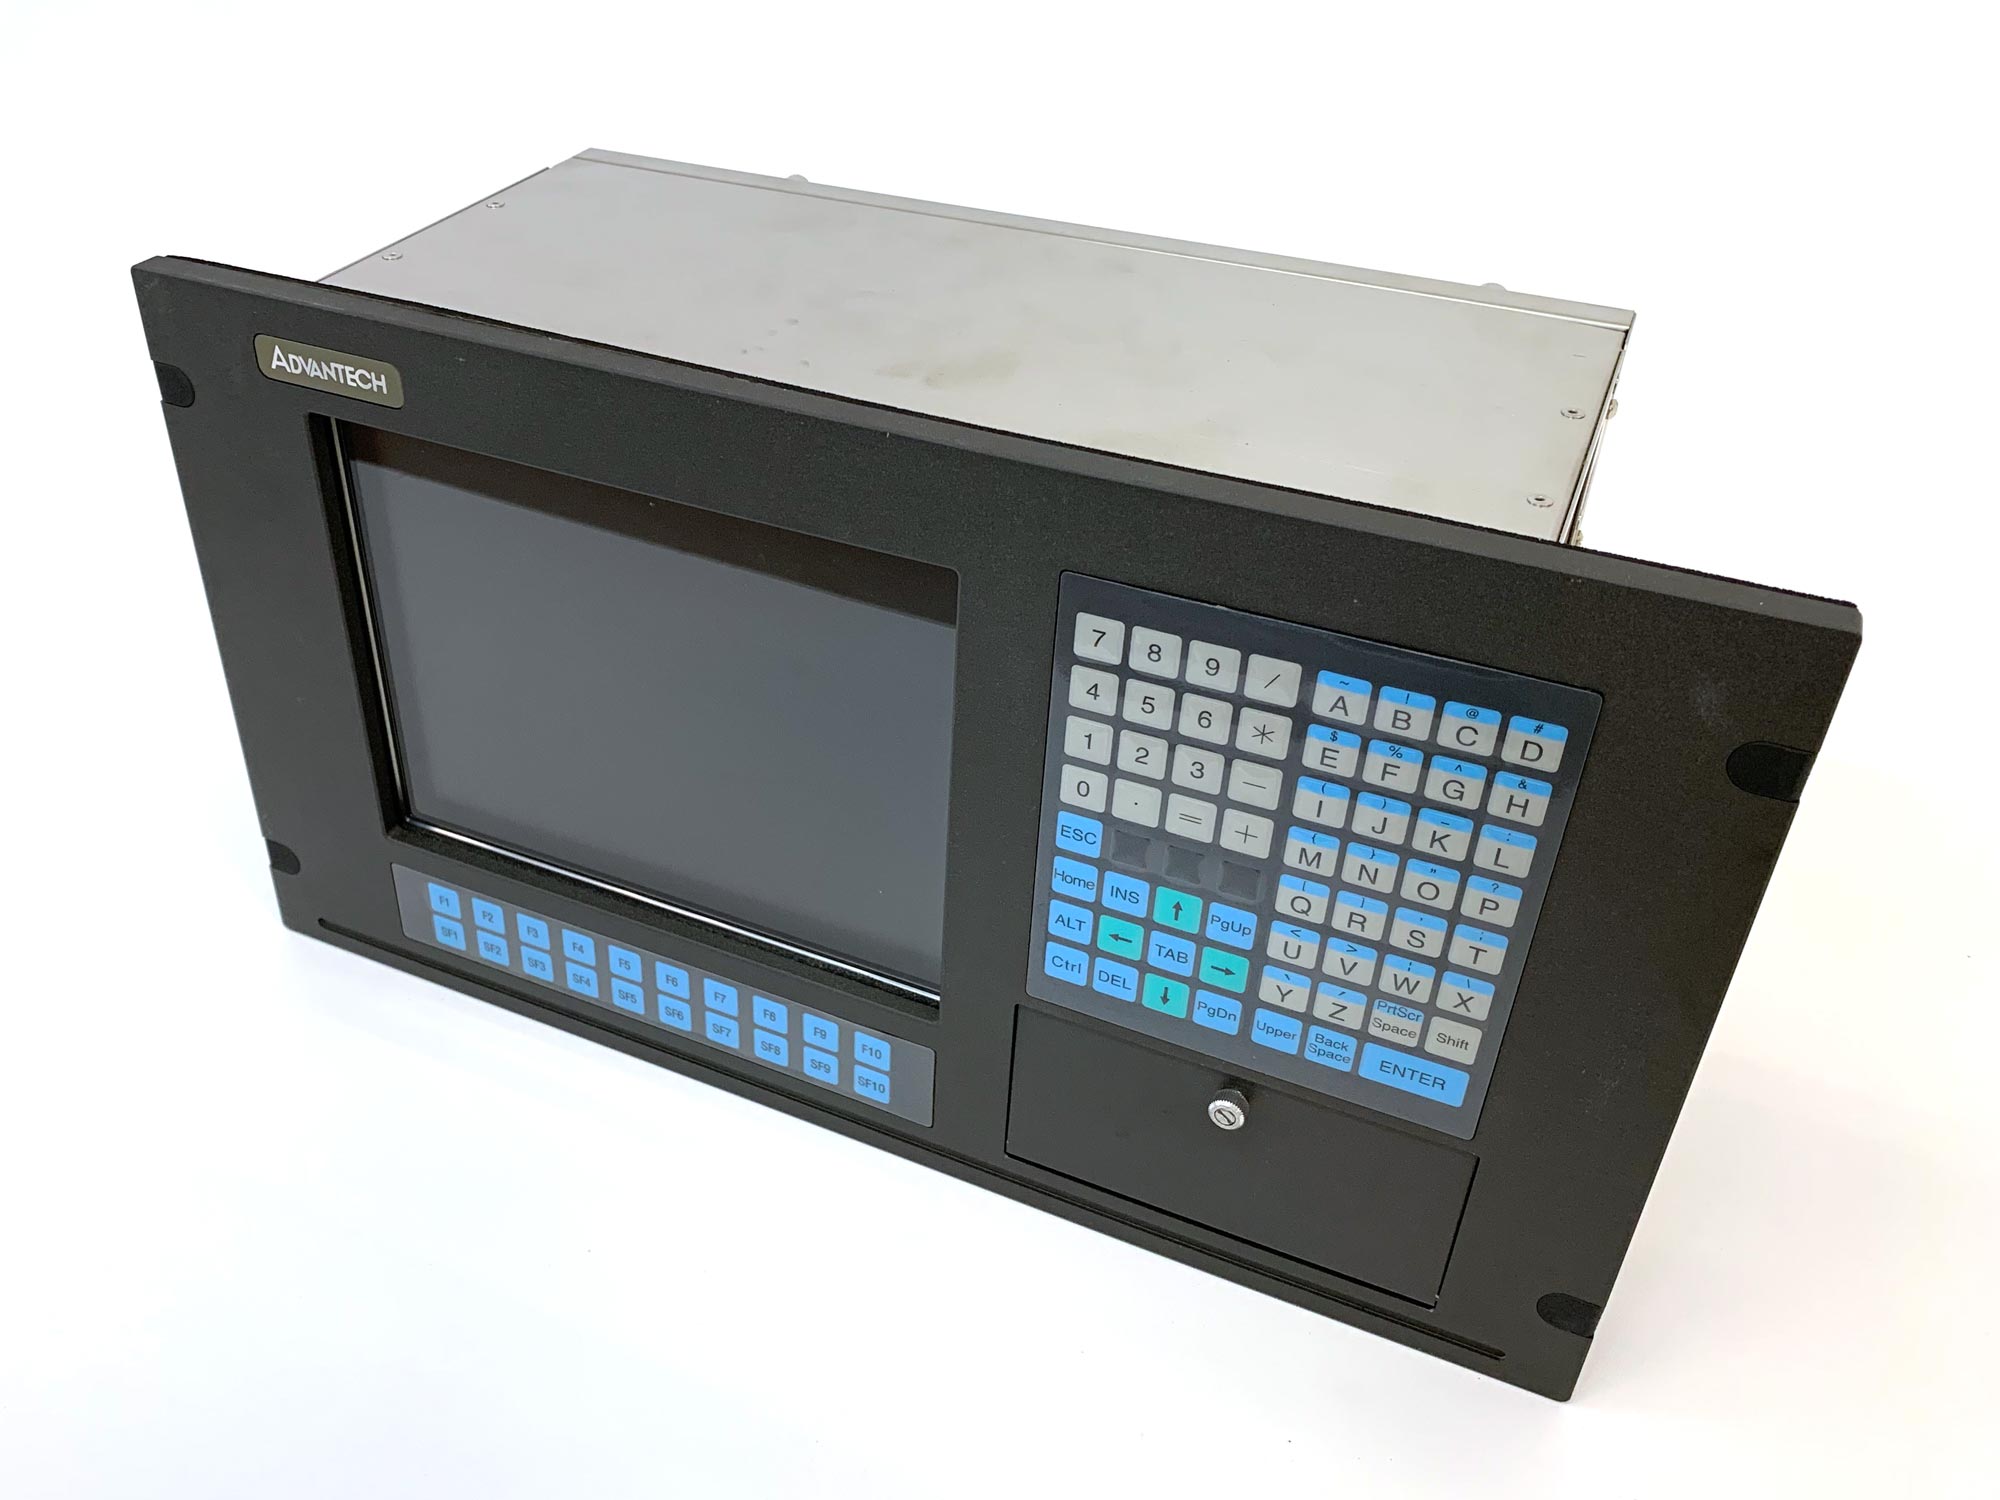 AWS-843 - Industrie Workstation mit 10,4" LCD Display